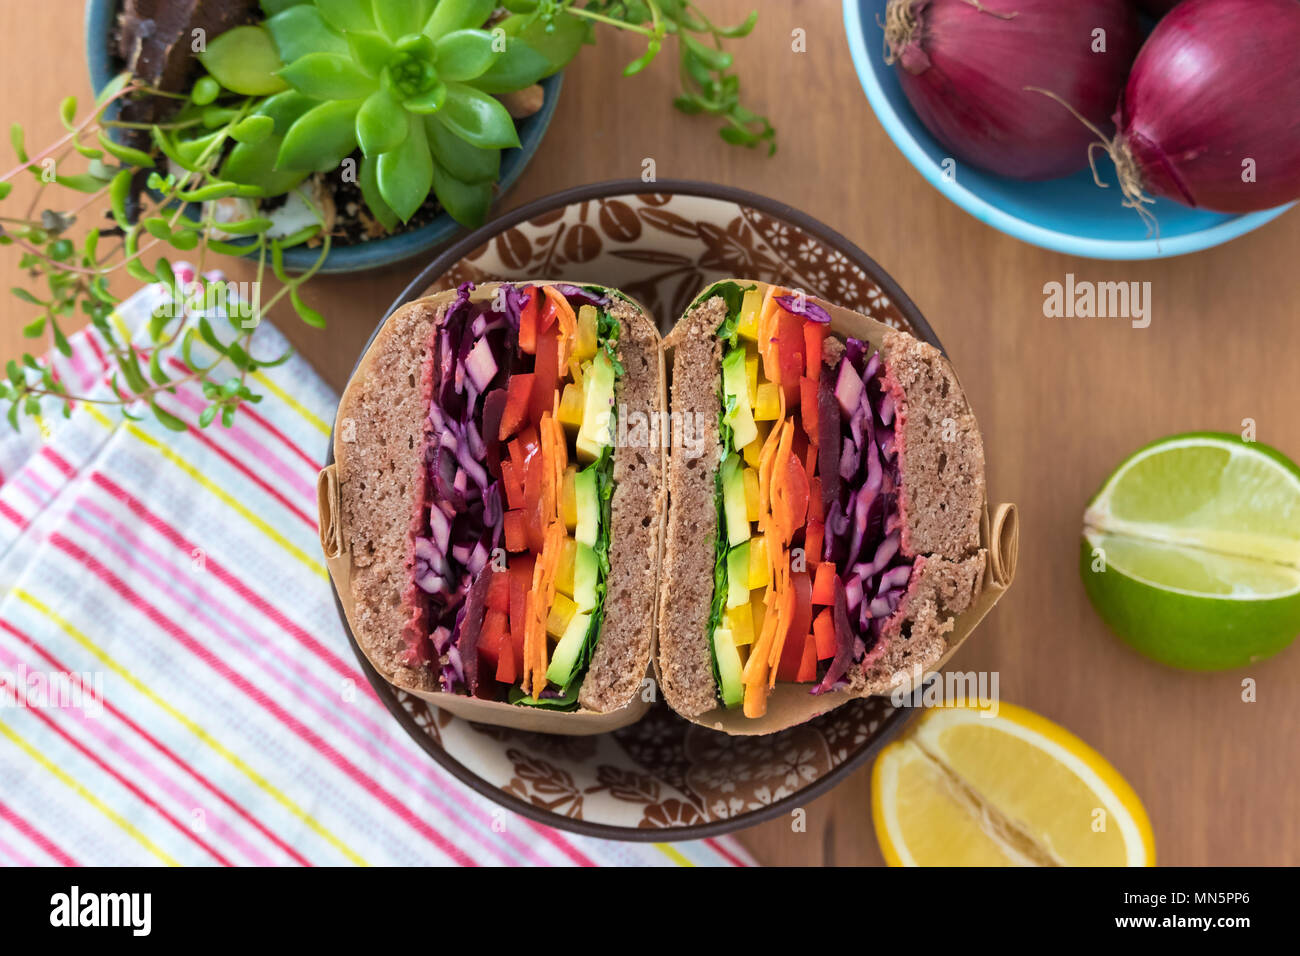 Rainbow salad sandwiches with homemade buckwheat bread, displayed on a wooden board. This fresh healthy lunch is low calorie, dairy free & gluten free. Stock Photo